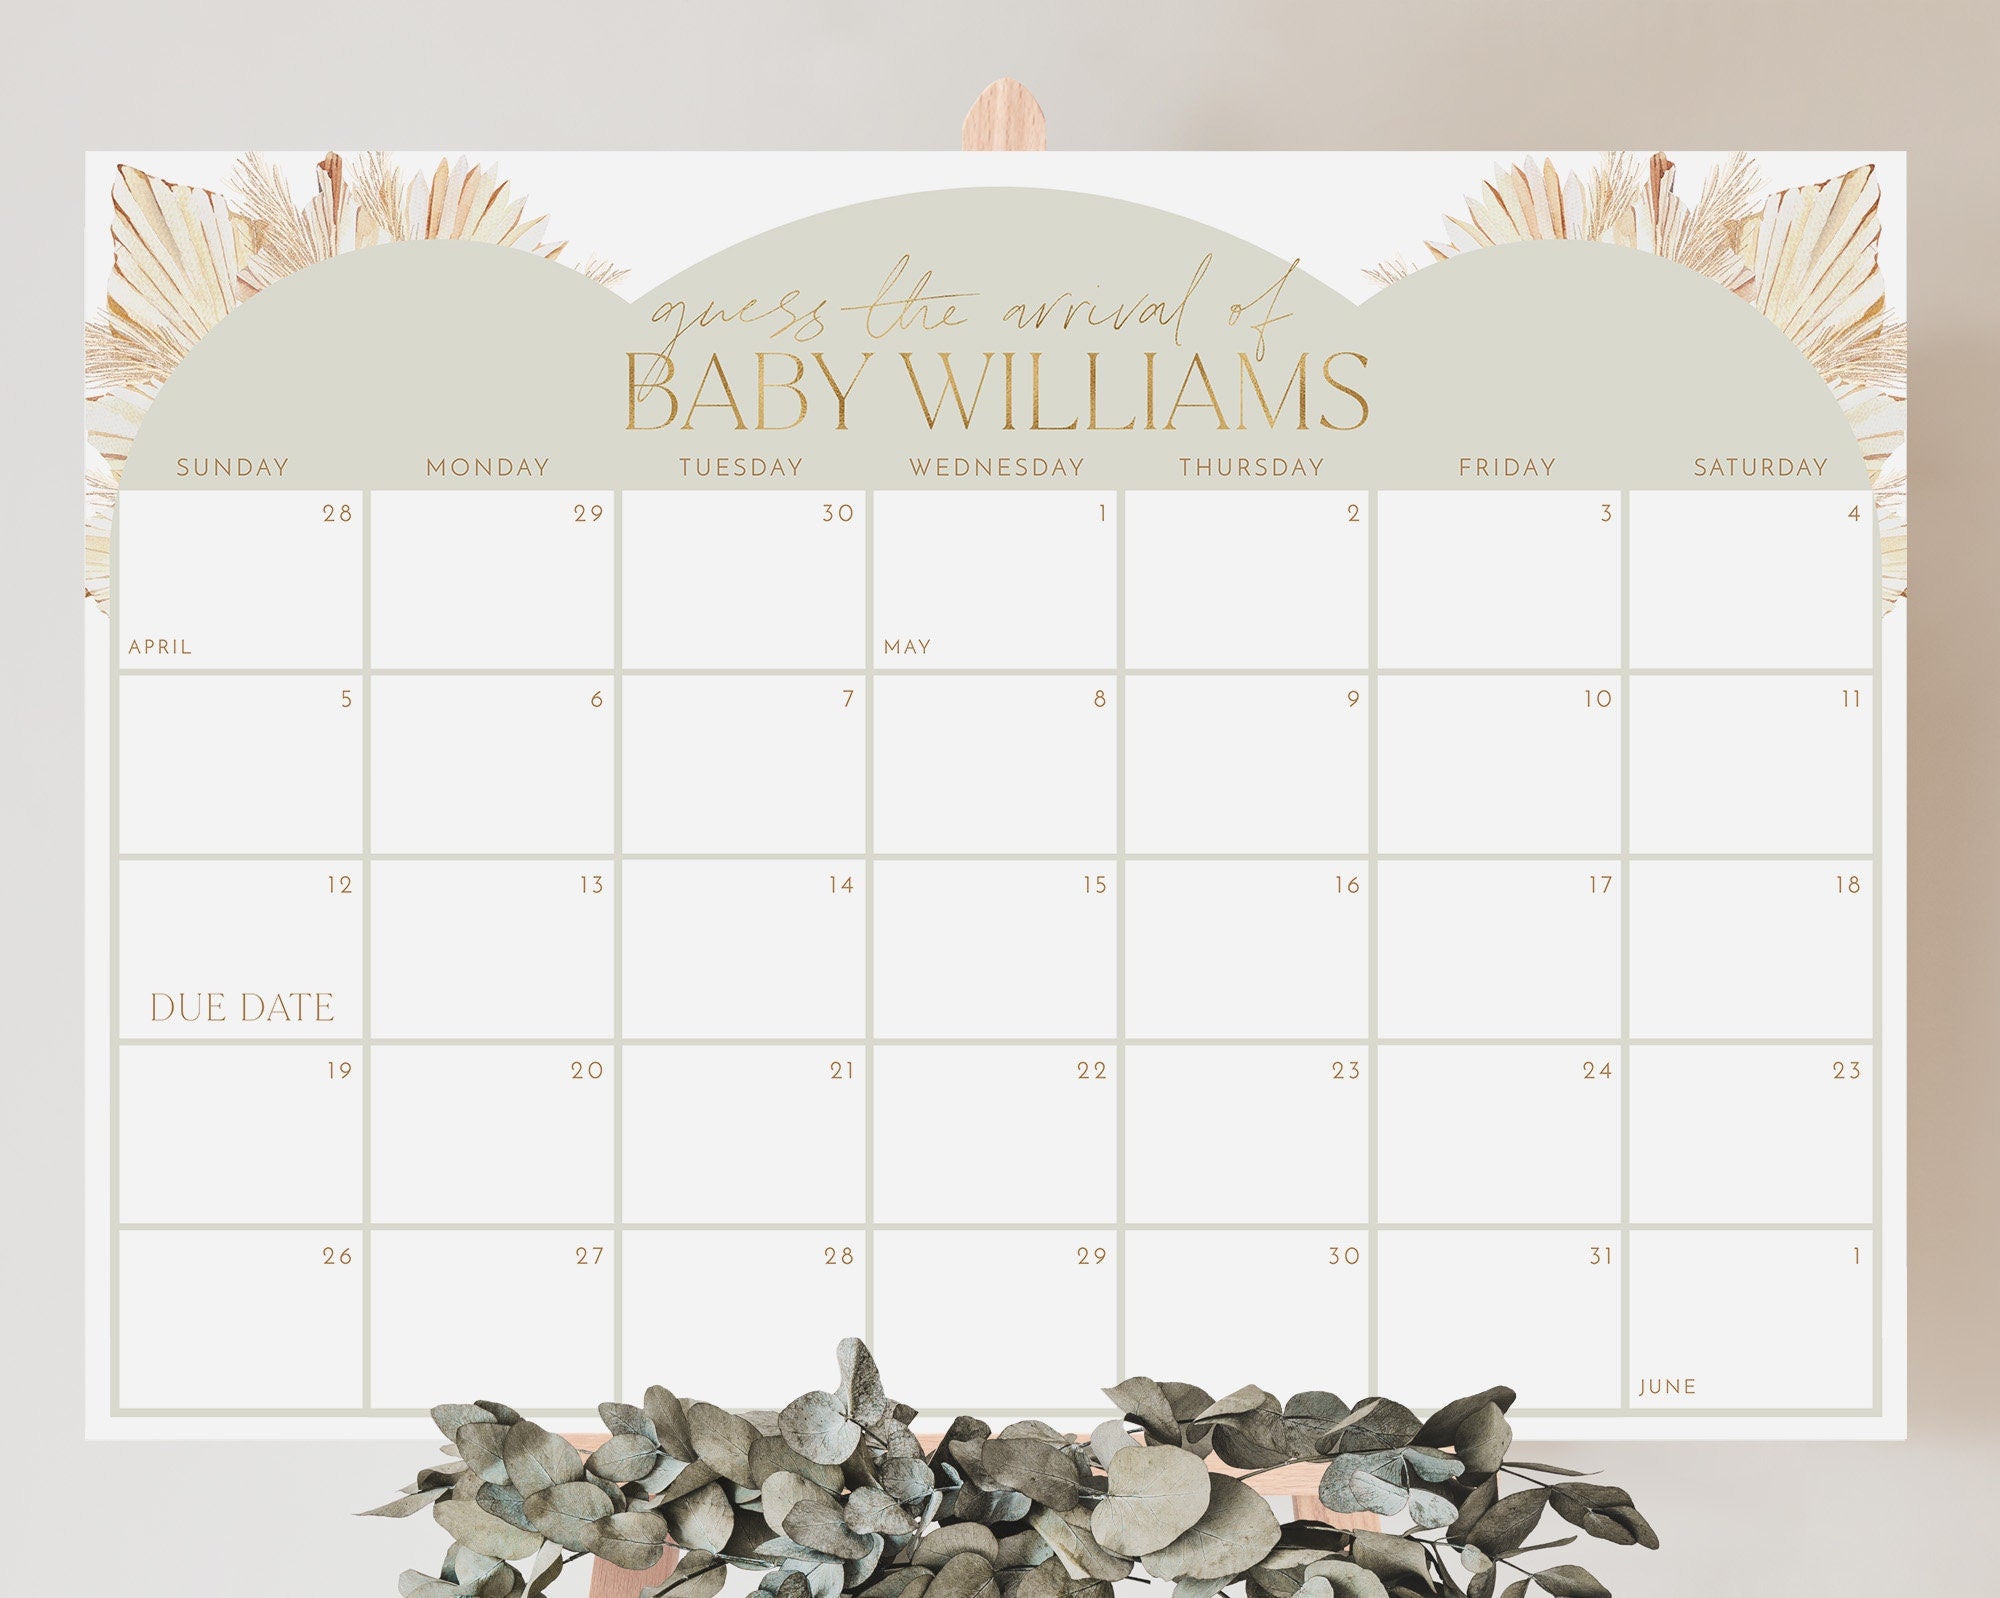 Sage Baby Shower Due Date Calendar, Boho Baby Birth Date Sign, Guess the Arrival Date Sign, Due Date Sign, Green Editable Printable Baby